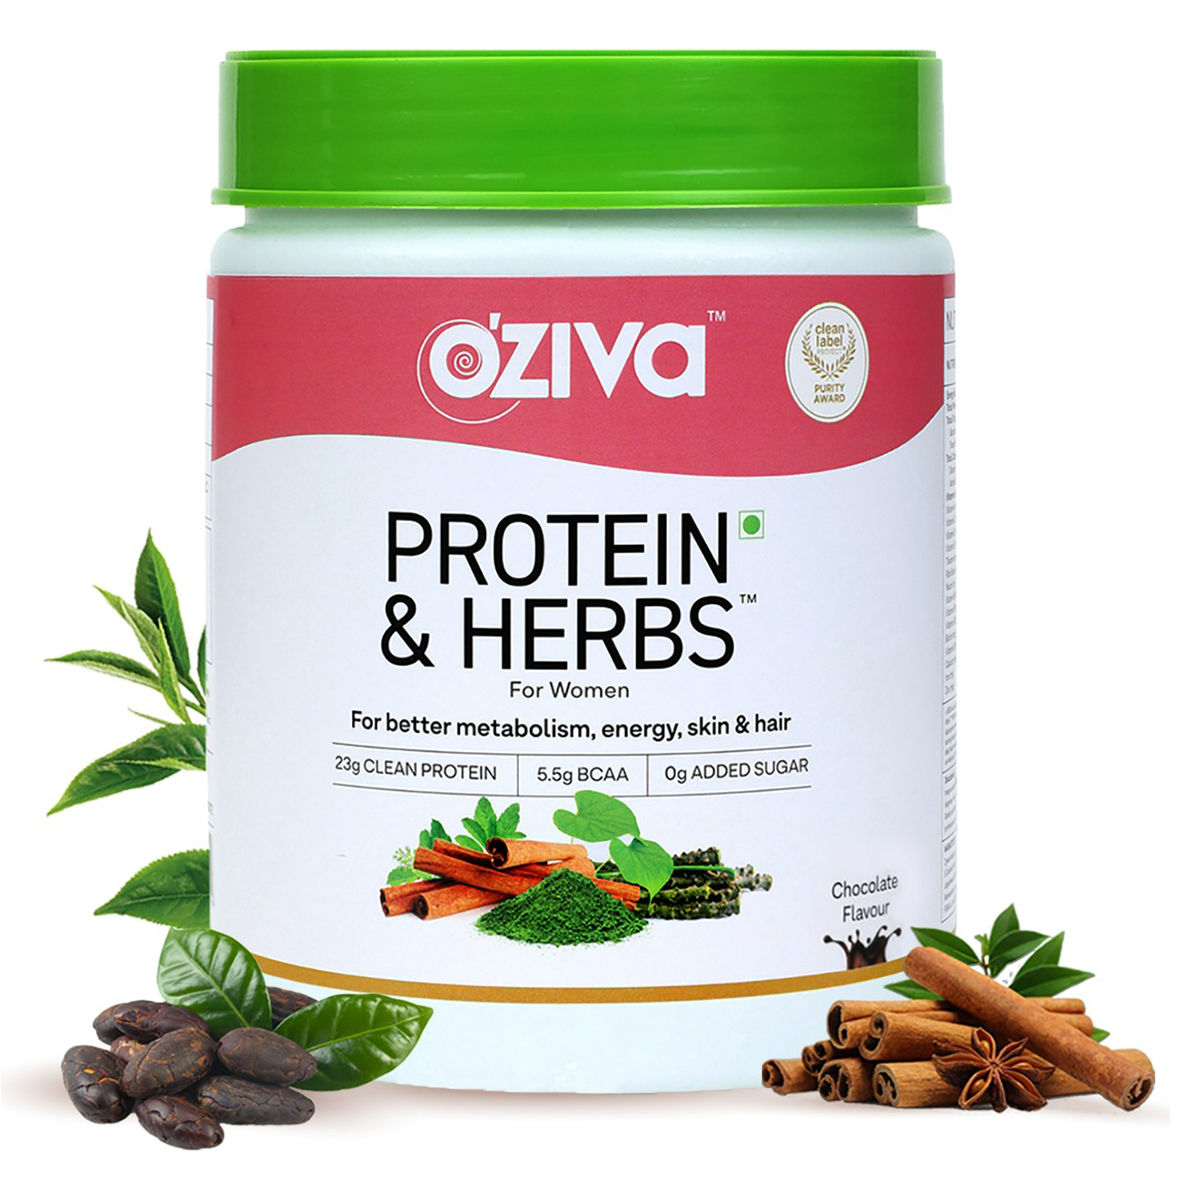 OZiva Protein & Herbs Chocolate Flavour Powder for Women, 500 gm, Pack of 1 